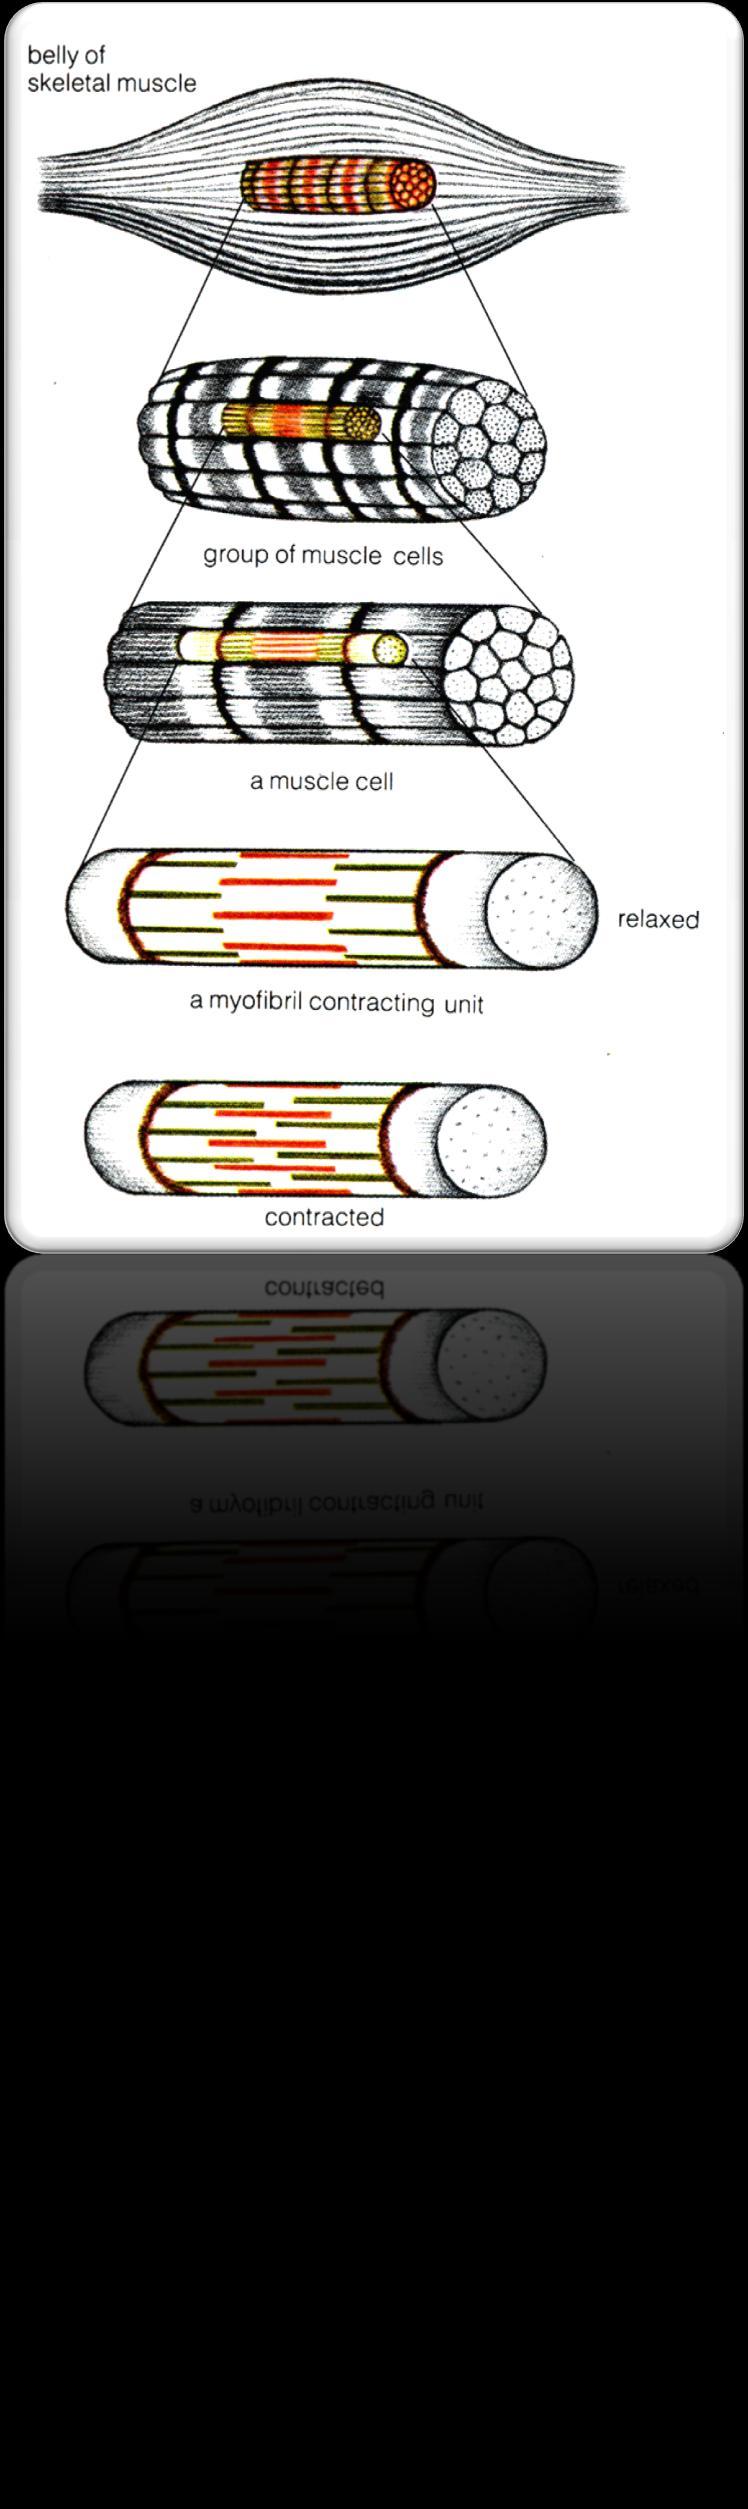 Each muscle cell is made up of many smaller MYOFIBRILS The MYOFIBRILS are in contact with a nerve ending.